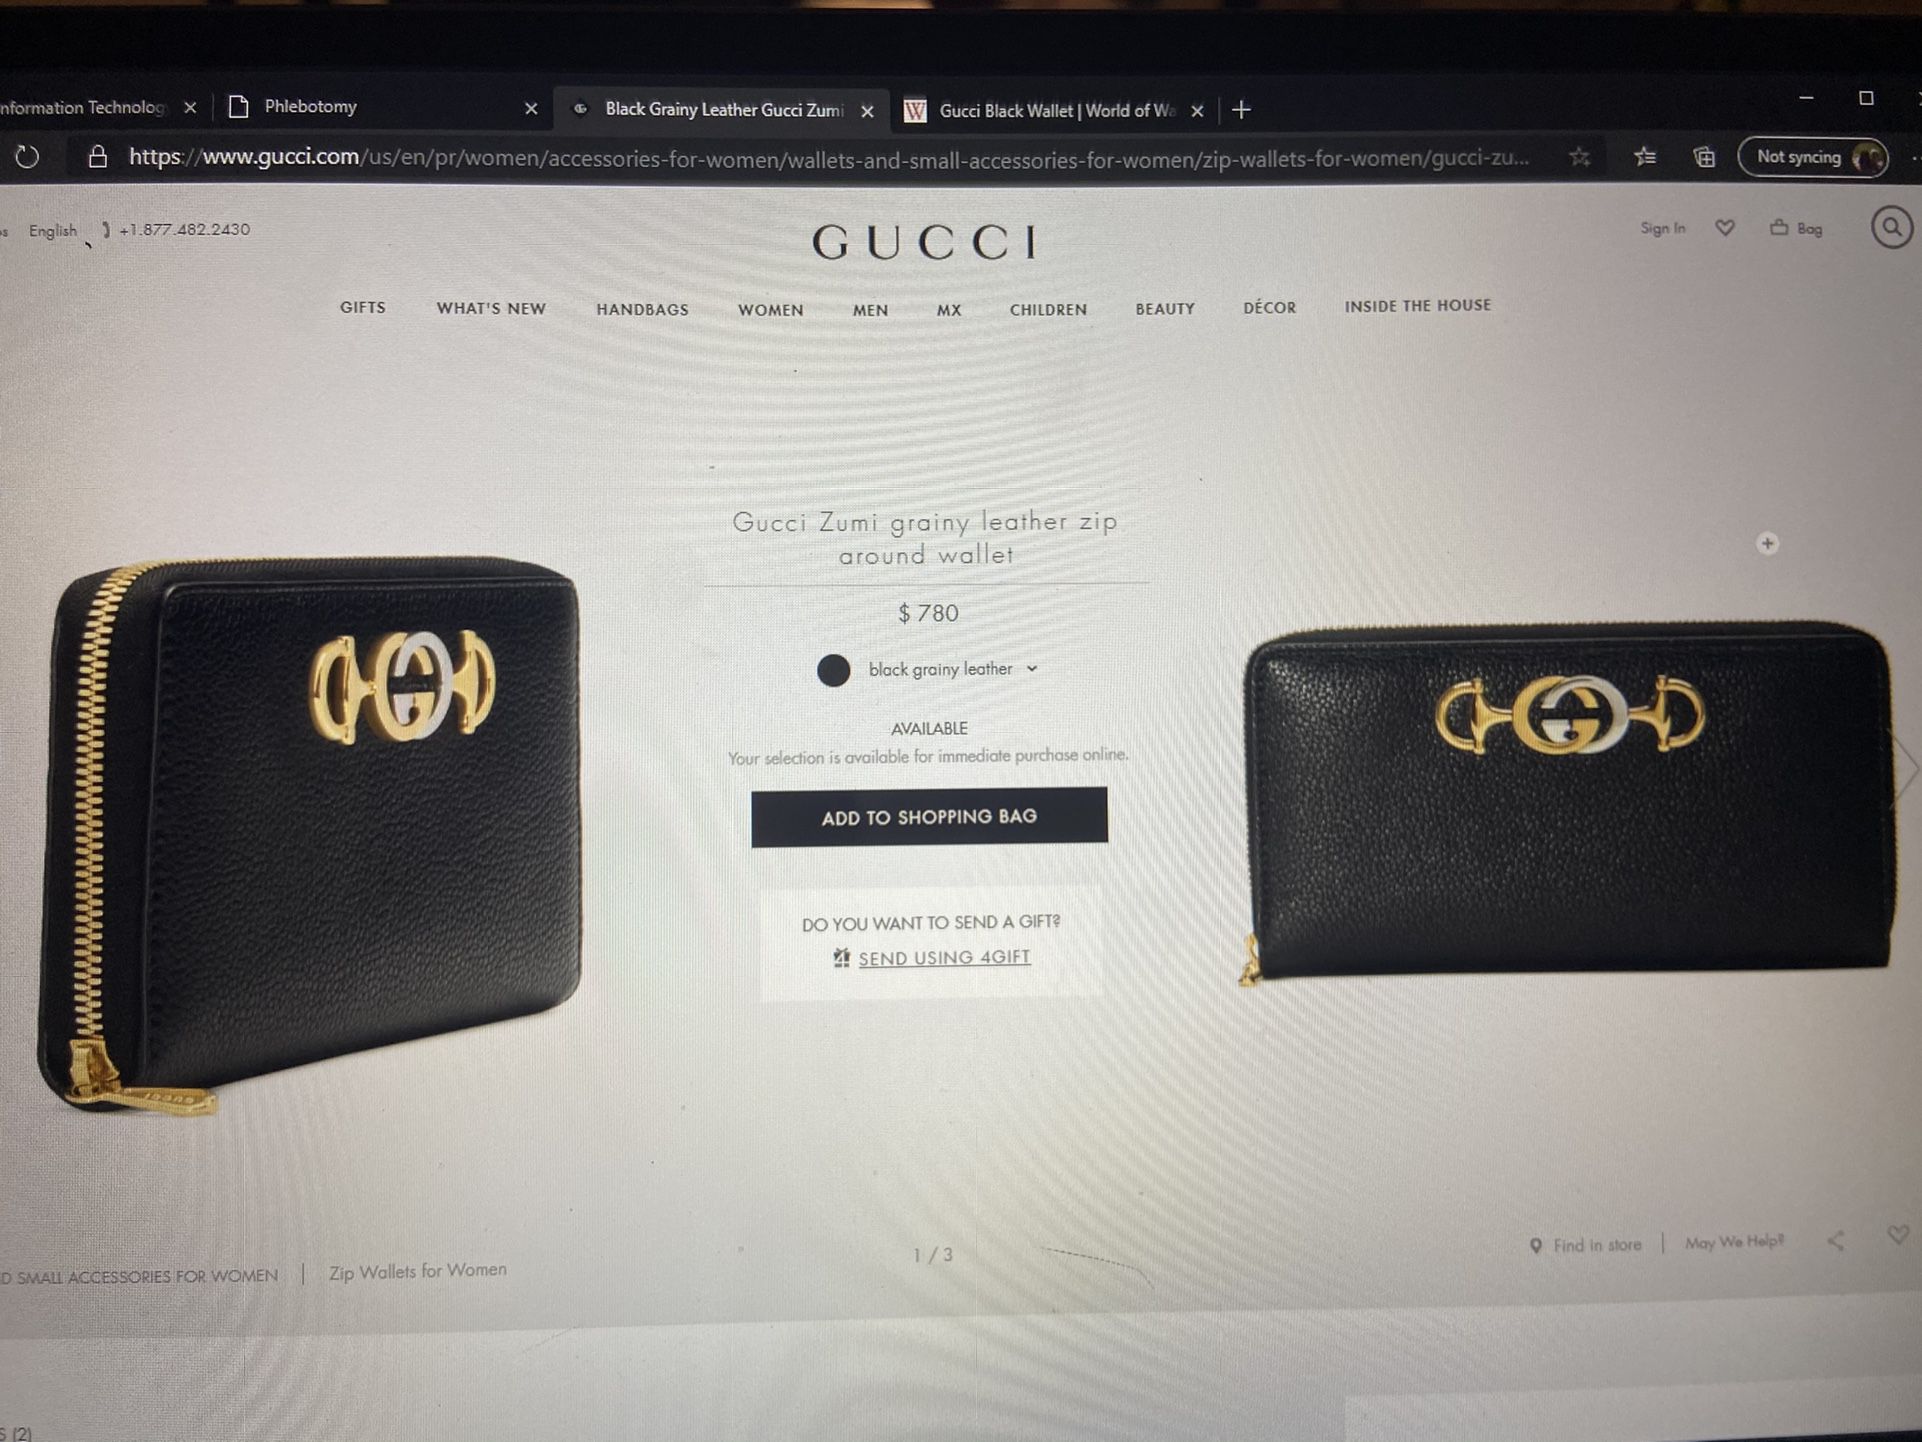 Gucci Zumi grainy leather zip around wallet (used & authentic)